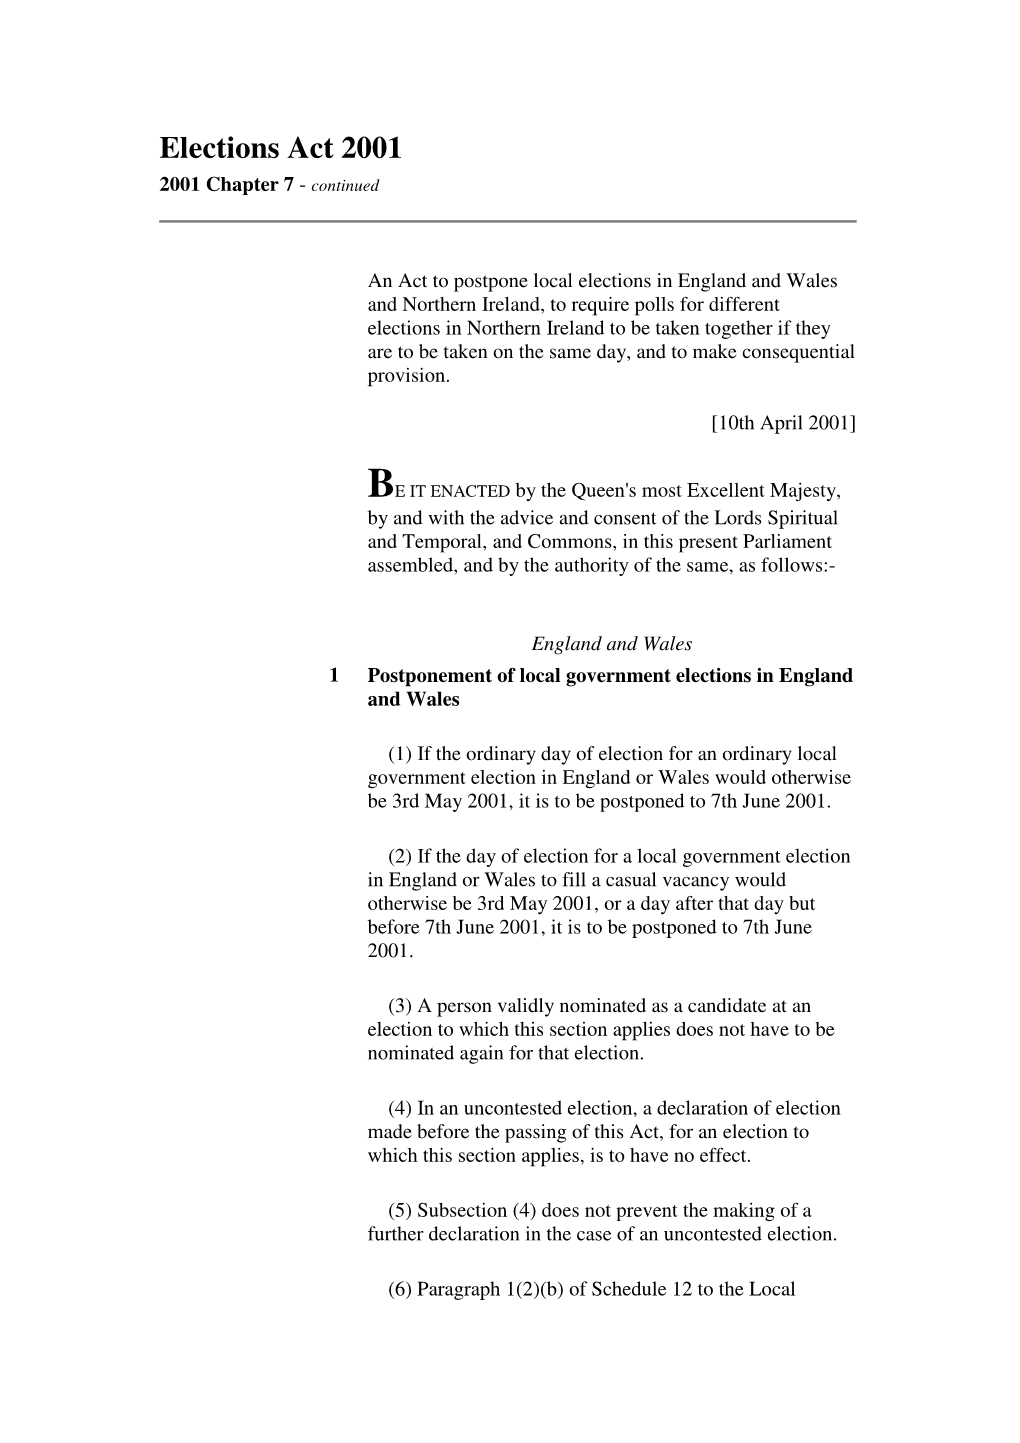 Elections Act 2001 2001 Chapter 7 - Continued